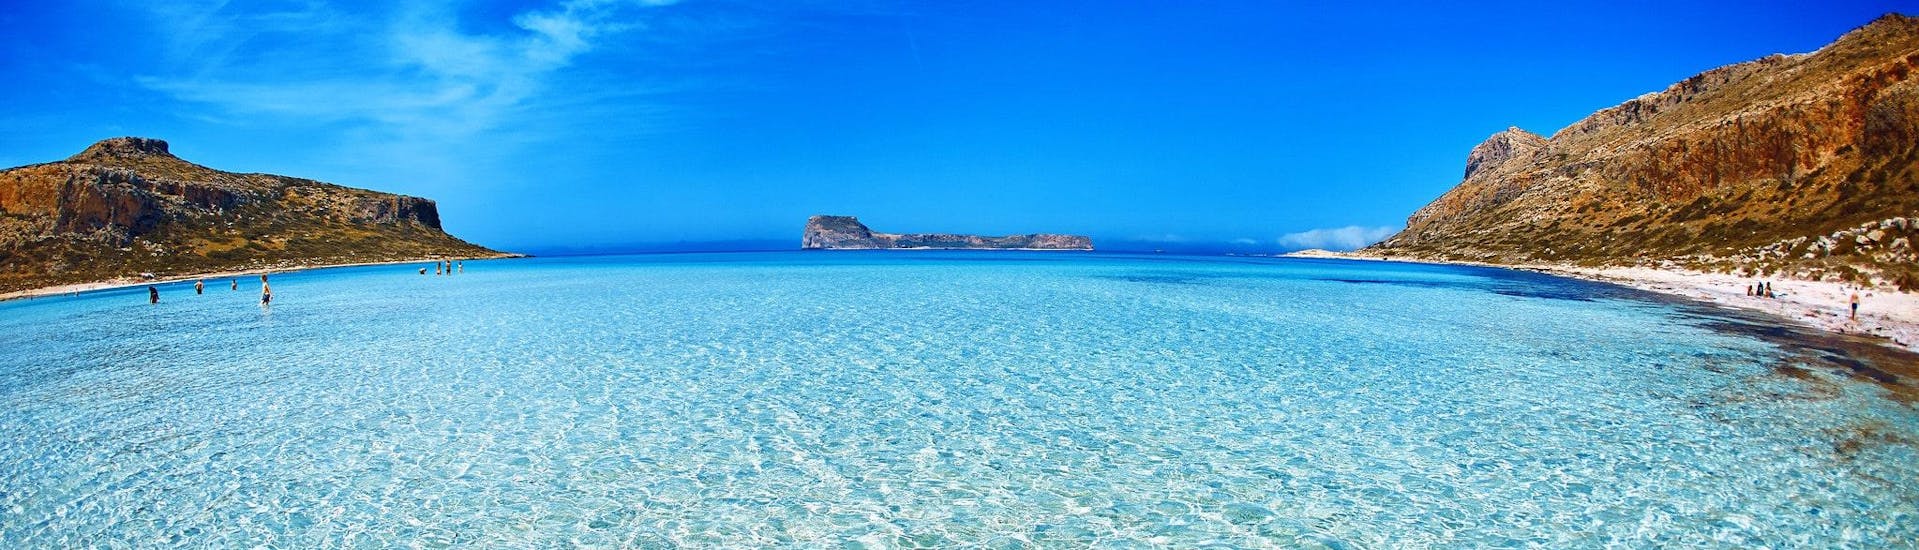 The stunning Balos Lagoon, which can be visited during many boat trips from Chania.